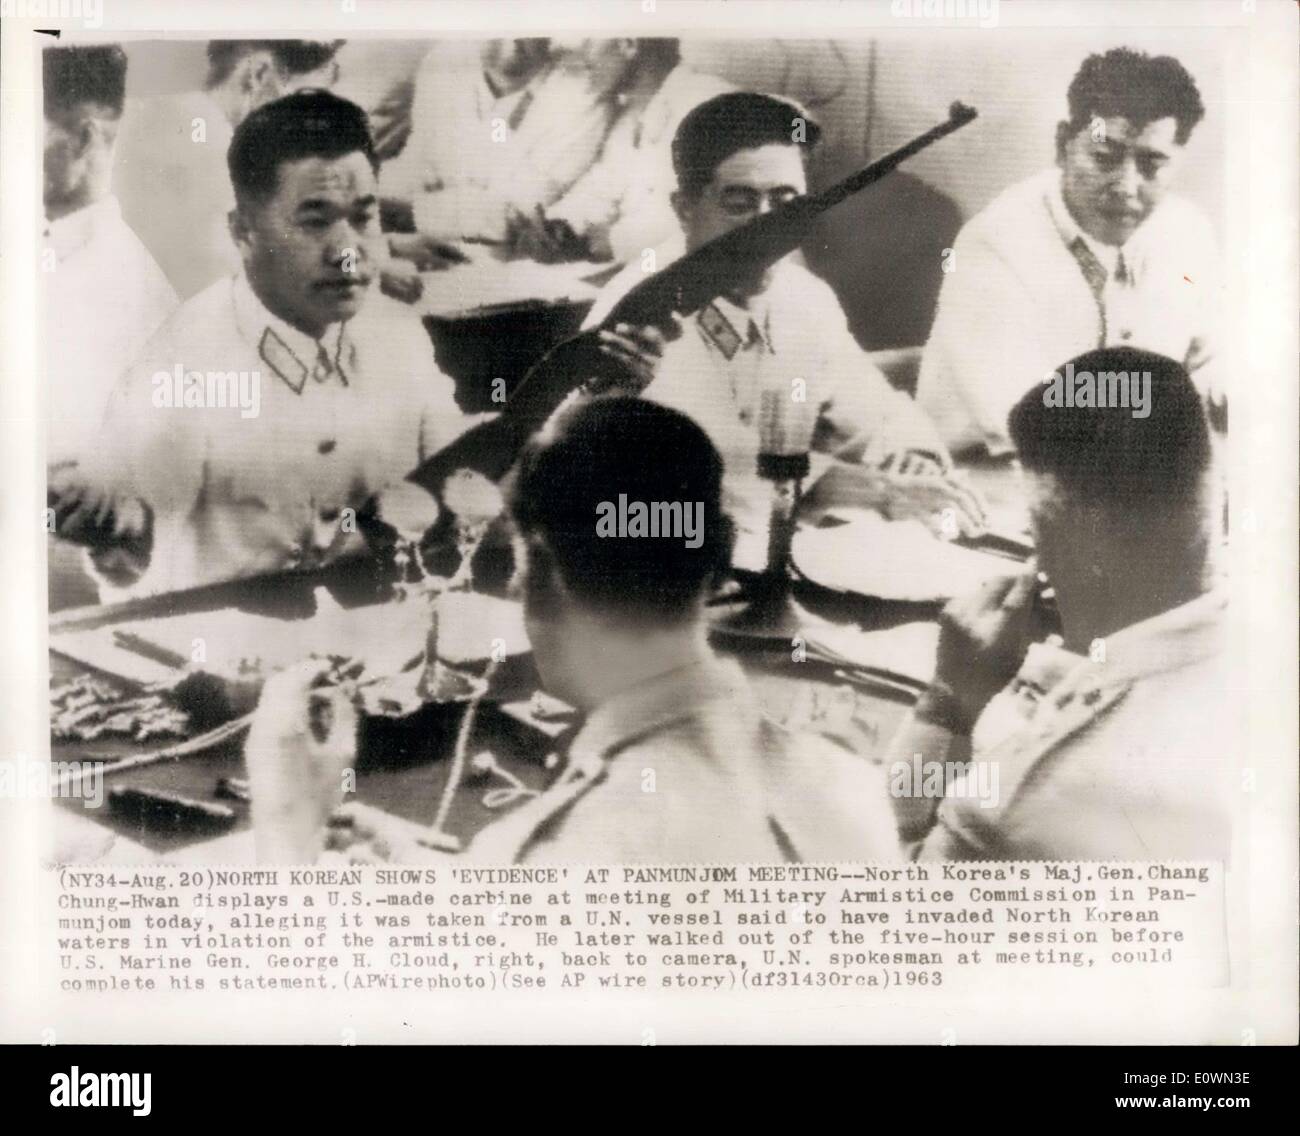 Aug. 20, 1963 - North Korean Shows 'Evidence' At Panmunjom Meeting - North Korea's Maj. Gen. Chang Cahung -Hwan display a U.S. - made carbine at meeting of military Armistice commission in Panmunjom today. alleging it was taken from a U.N. vessel said to have invaded North Korean waters in violation of the armistice. He later walked out of the five-hour session before U.S&gt; Marine Gen. George H. Cloud, right, back to camera, U.N. spokesman at meeting, could complete his statement Stock Photo